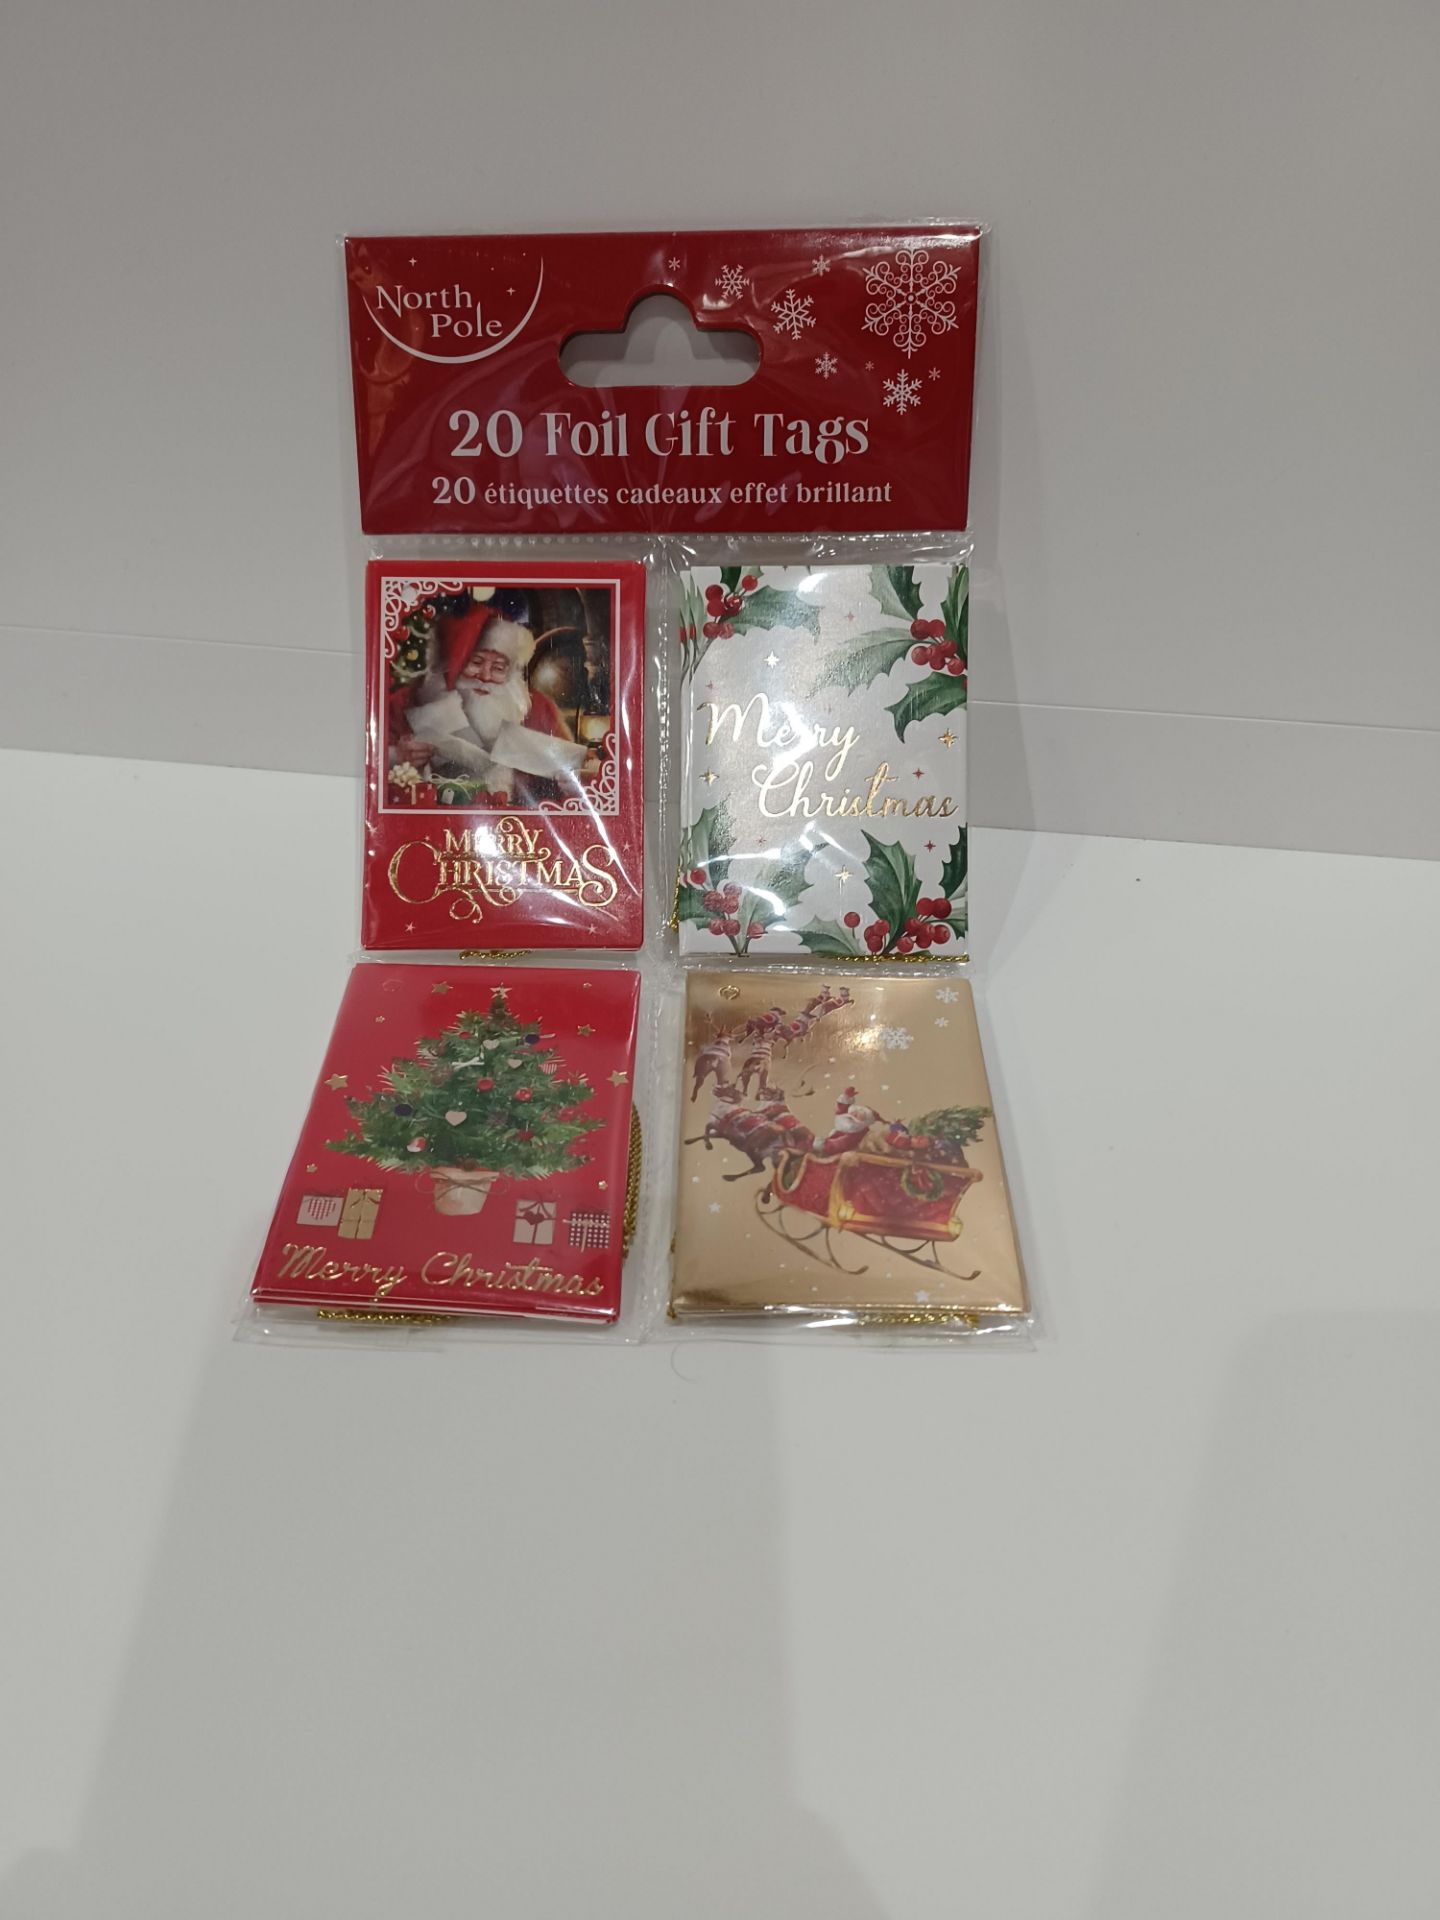 96 X NEW PACKAGED PACKS OF 20 NORTH POLE FOIL GIFT TAGS. ROW 15 B/W